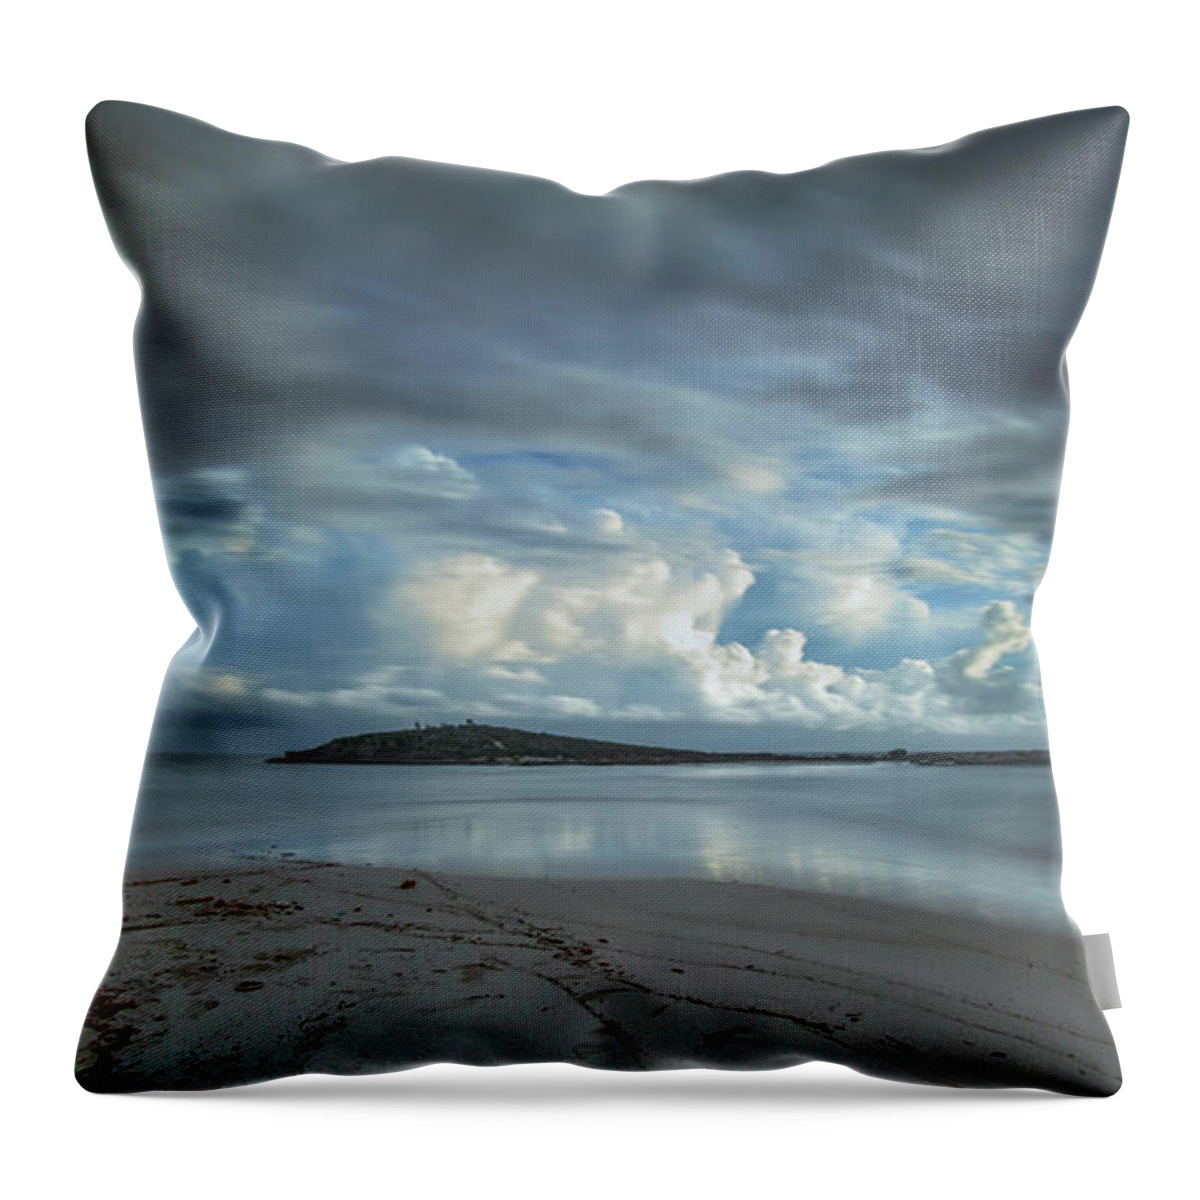 Rock Throw Pillow featuring the photograph Twilight Sea by Stelios Kleanthous